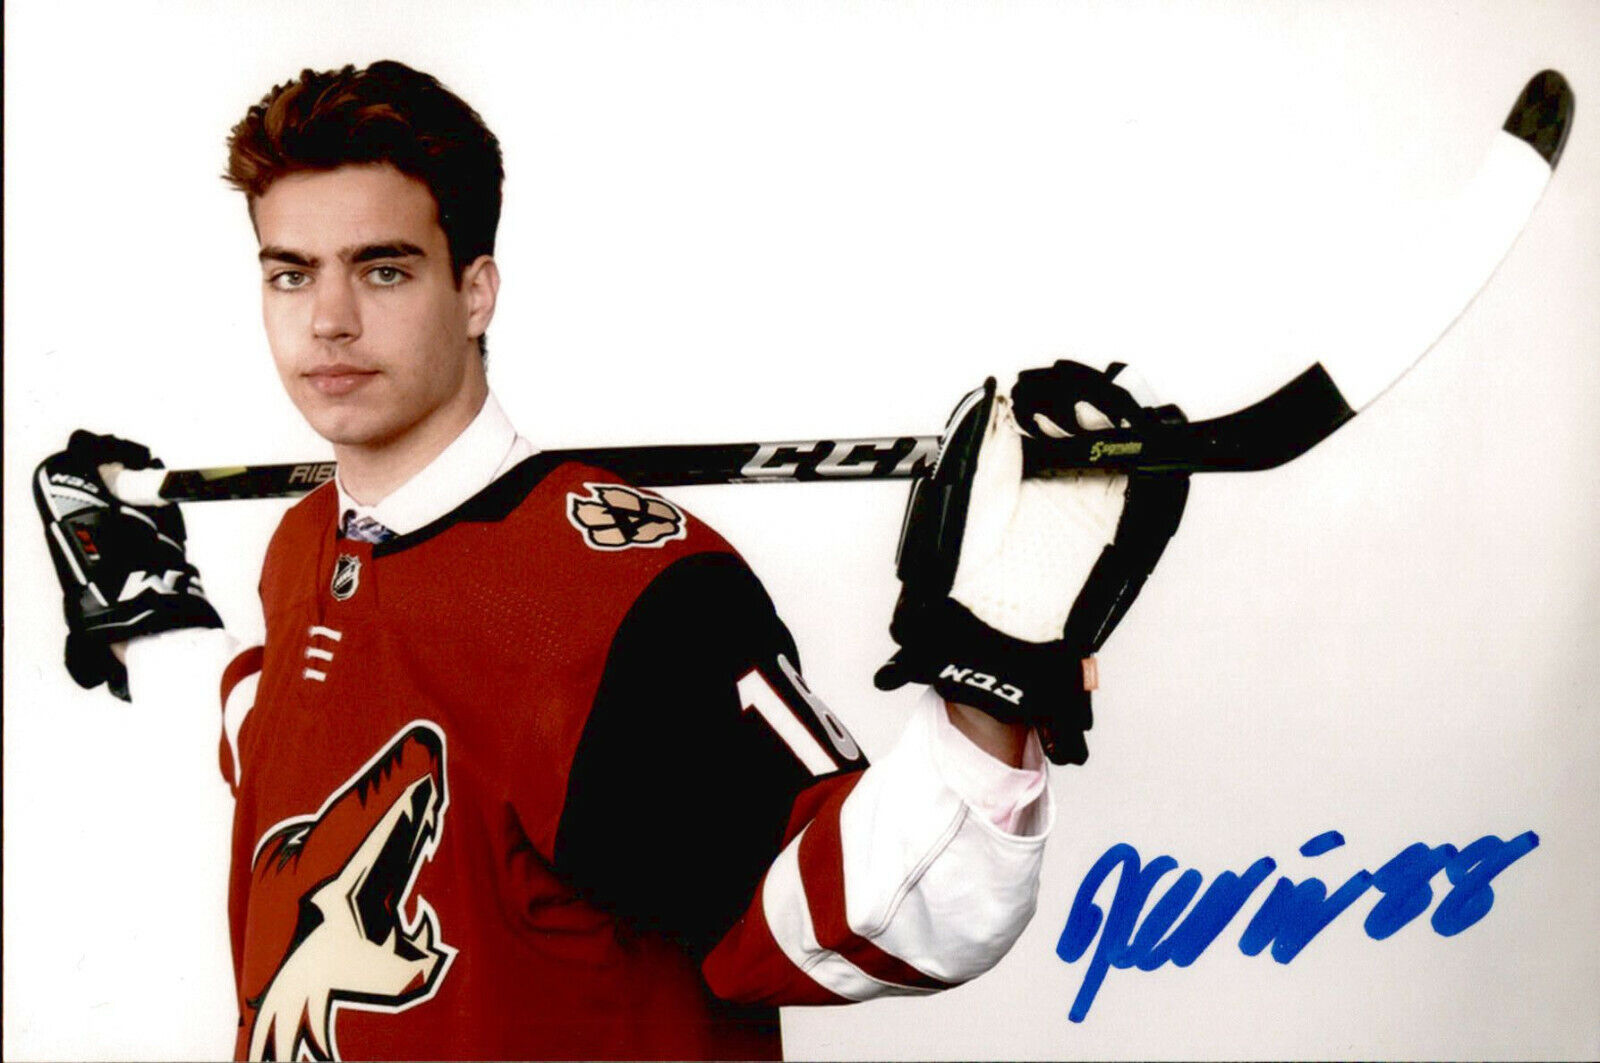 Kevin Bahl SIGNED 4x6 Photo Poster painting ARIZONA COYOTES #3